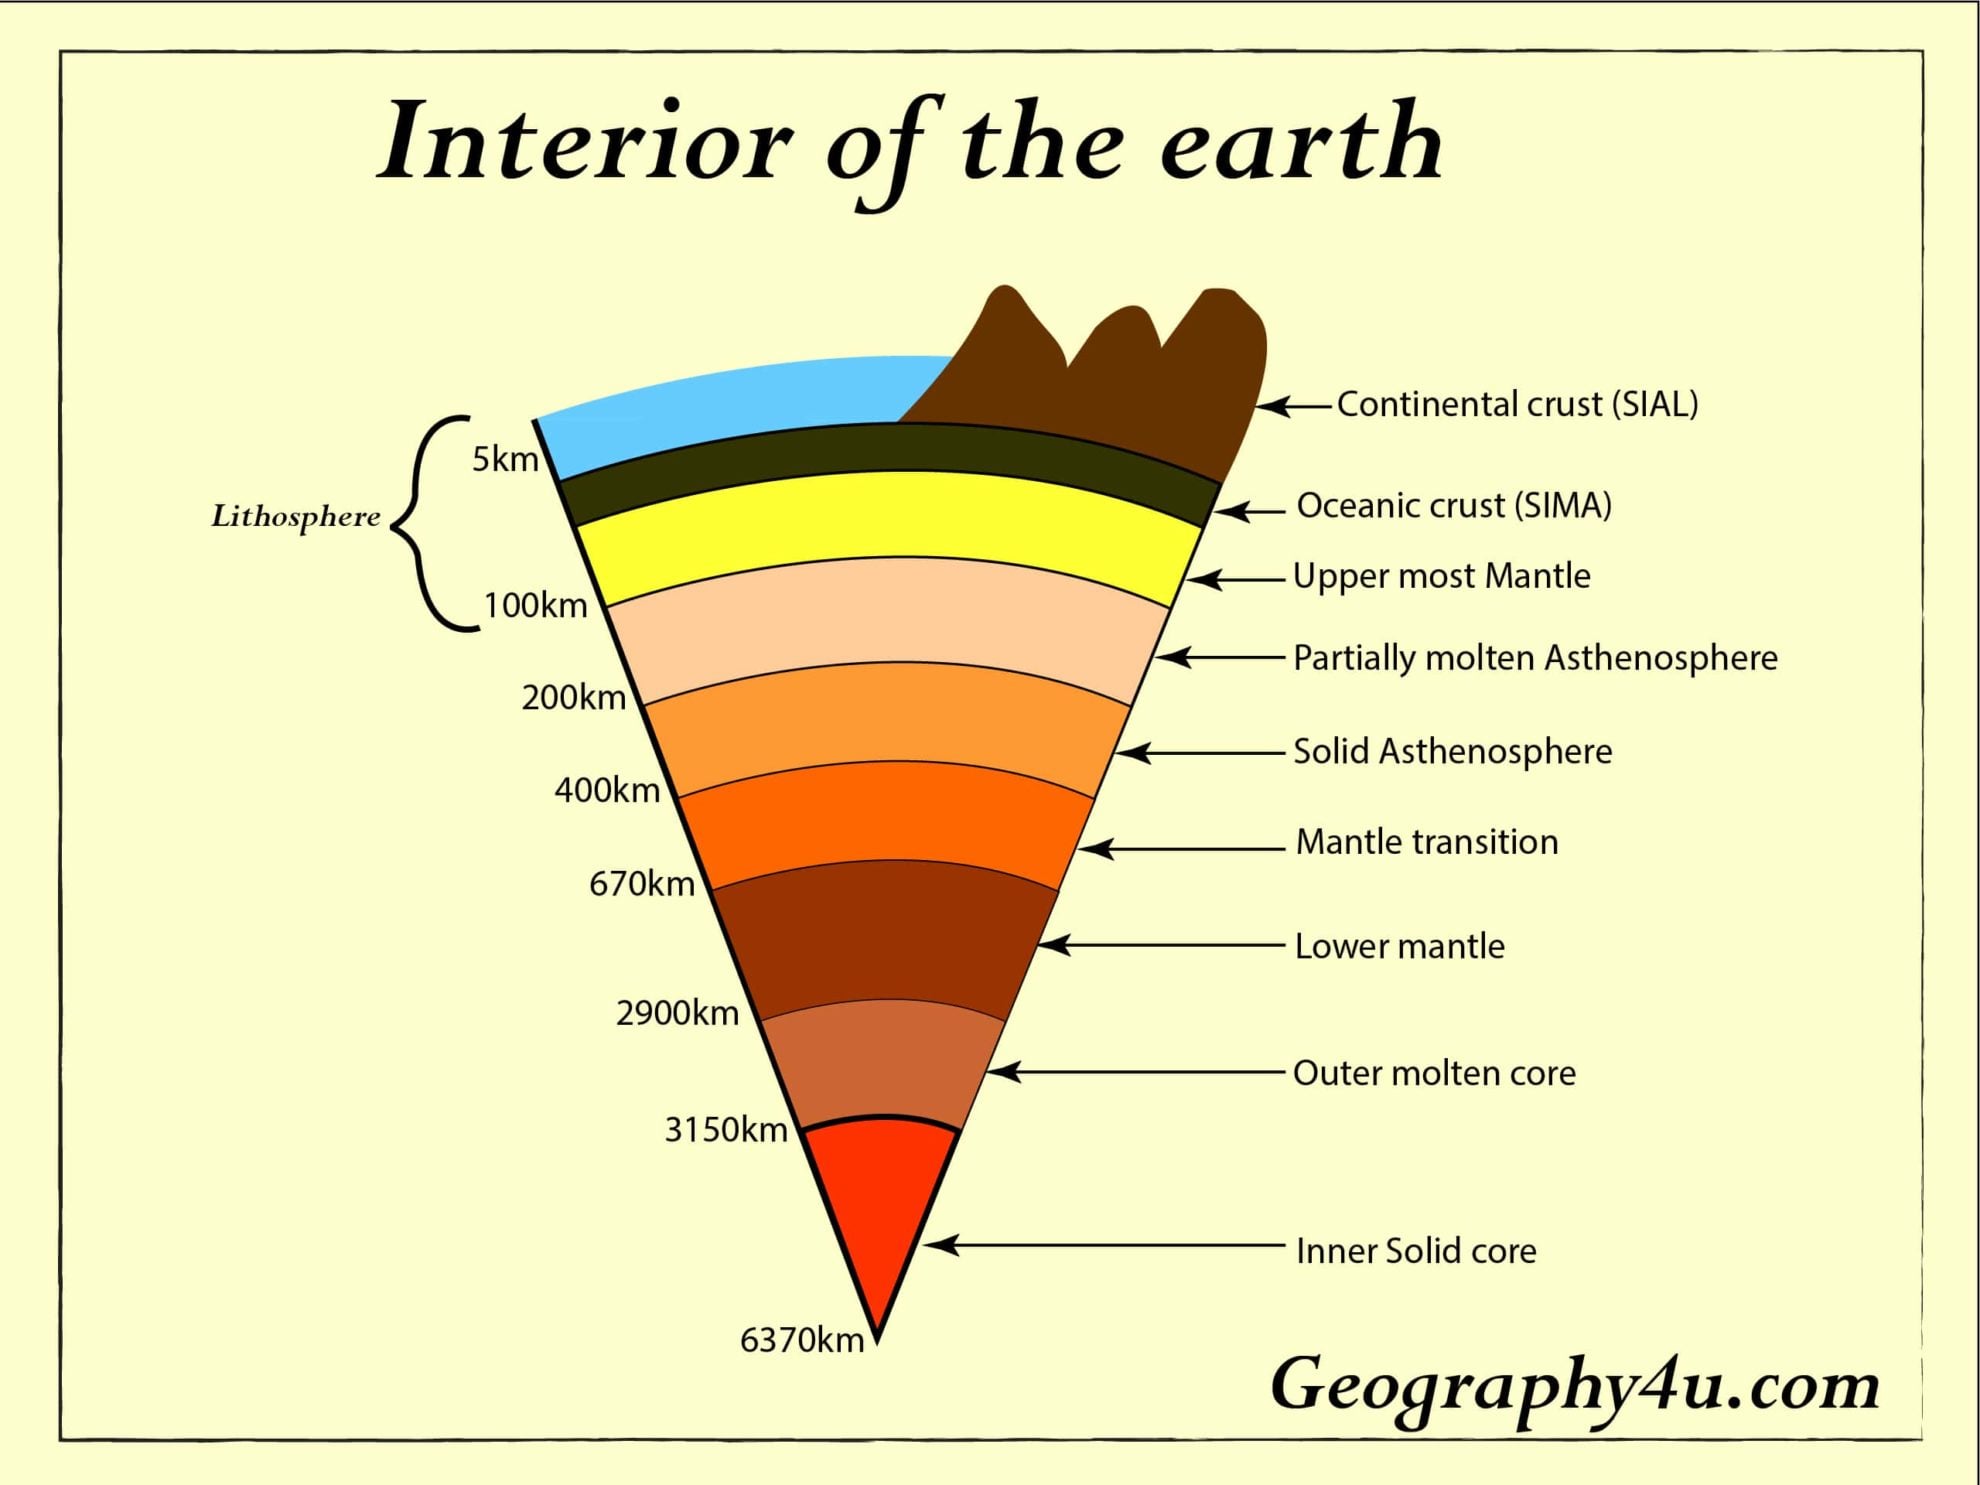 Earth's interior- Layers of the earth | Geography4u- read geography ...